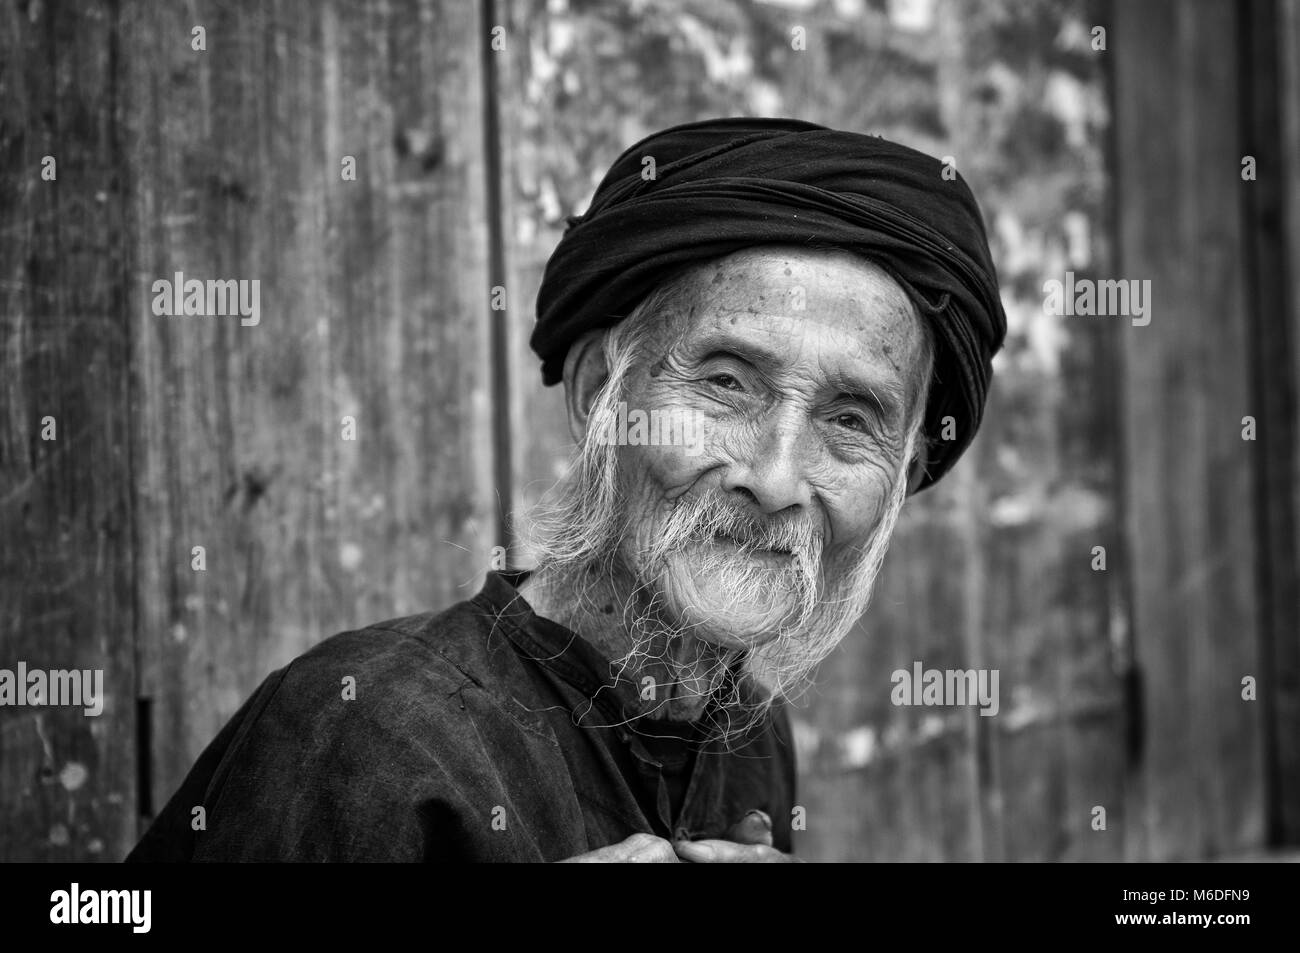 Dazhai, China - August 4 ,2012: Portrait of an old chinese man in the village of Dazhai in China, Asia Stock Photo